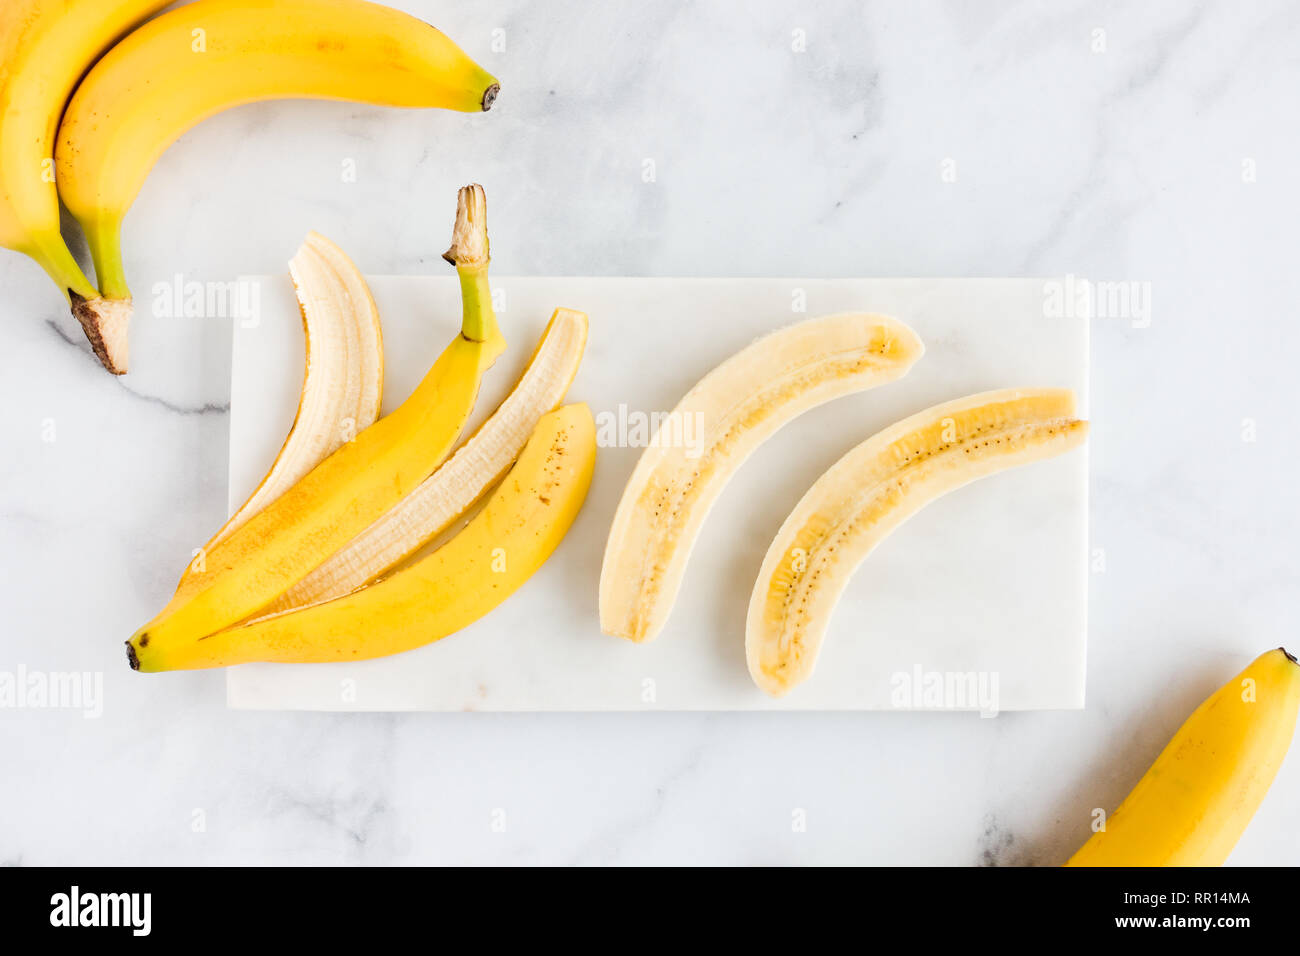 Bananas Banana Peel And A Peeled Banana Cut Lengthwise In Half On White Marble Board And Marble Background Top View Stock Photo Alamy